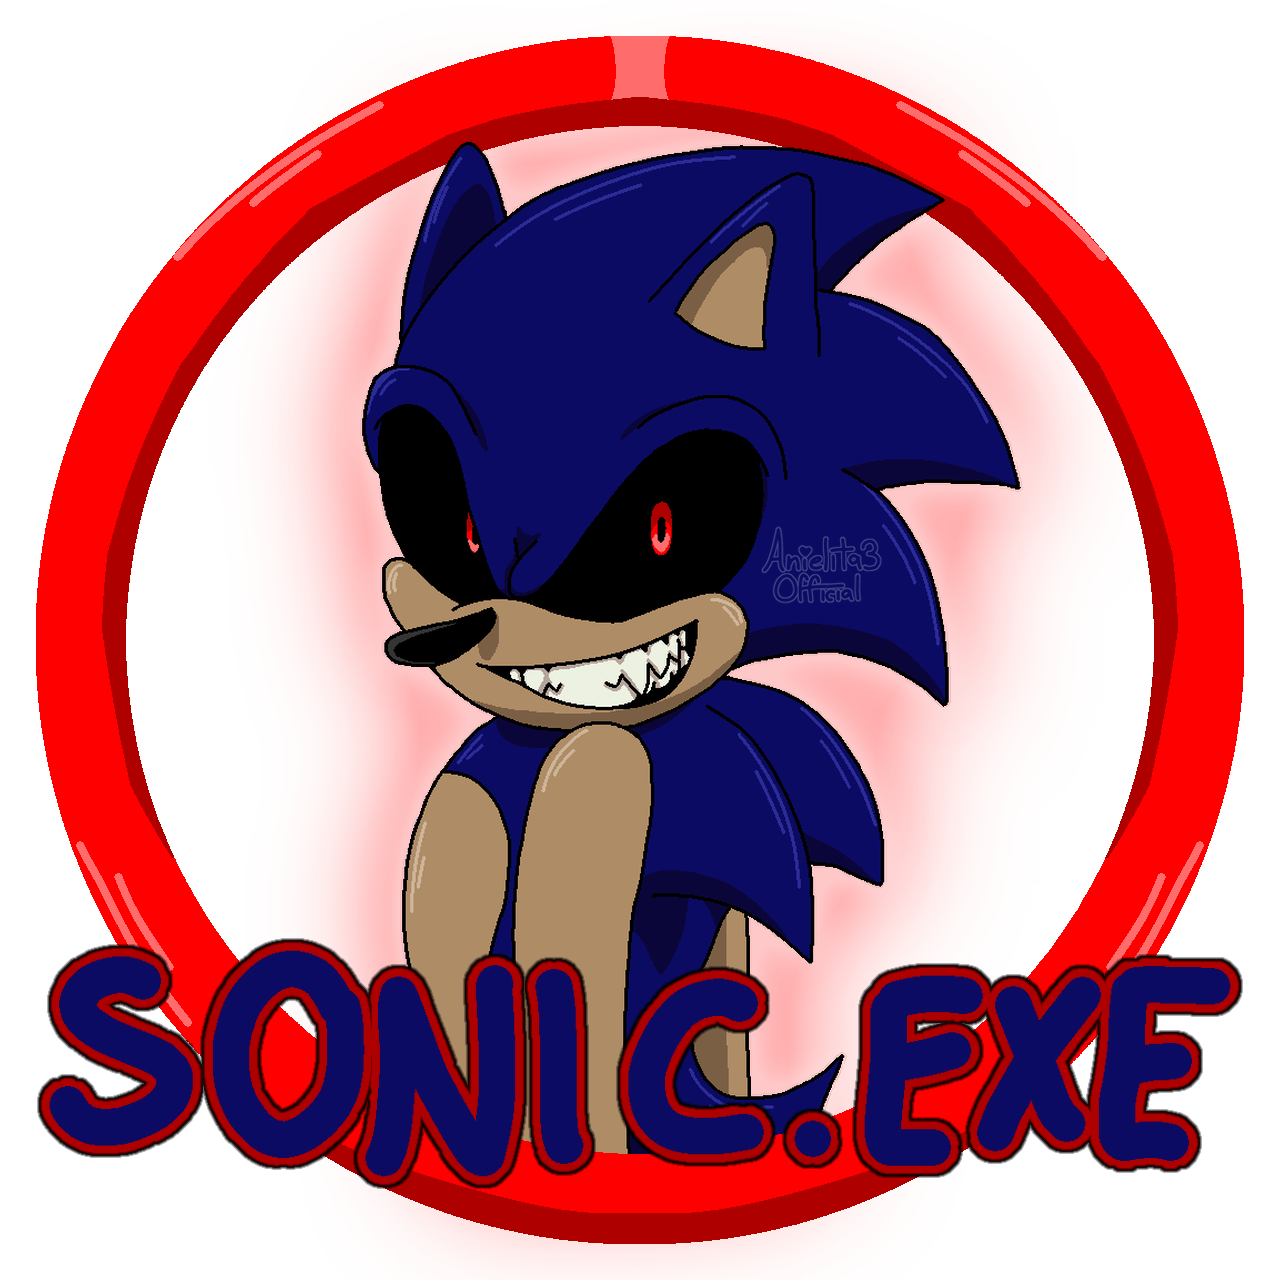 Sonic.exe (2023 remake) universe by sonicExE66696 on DeviantArt